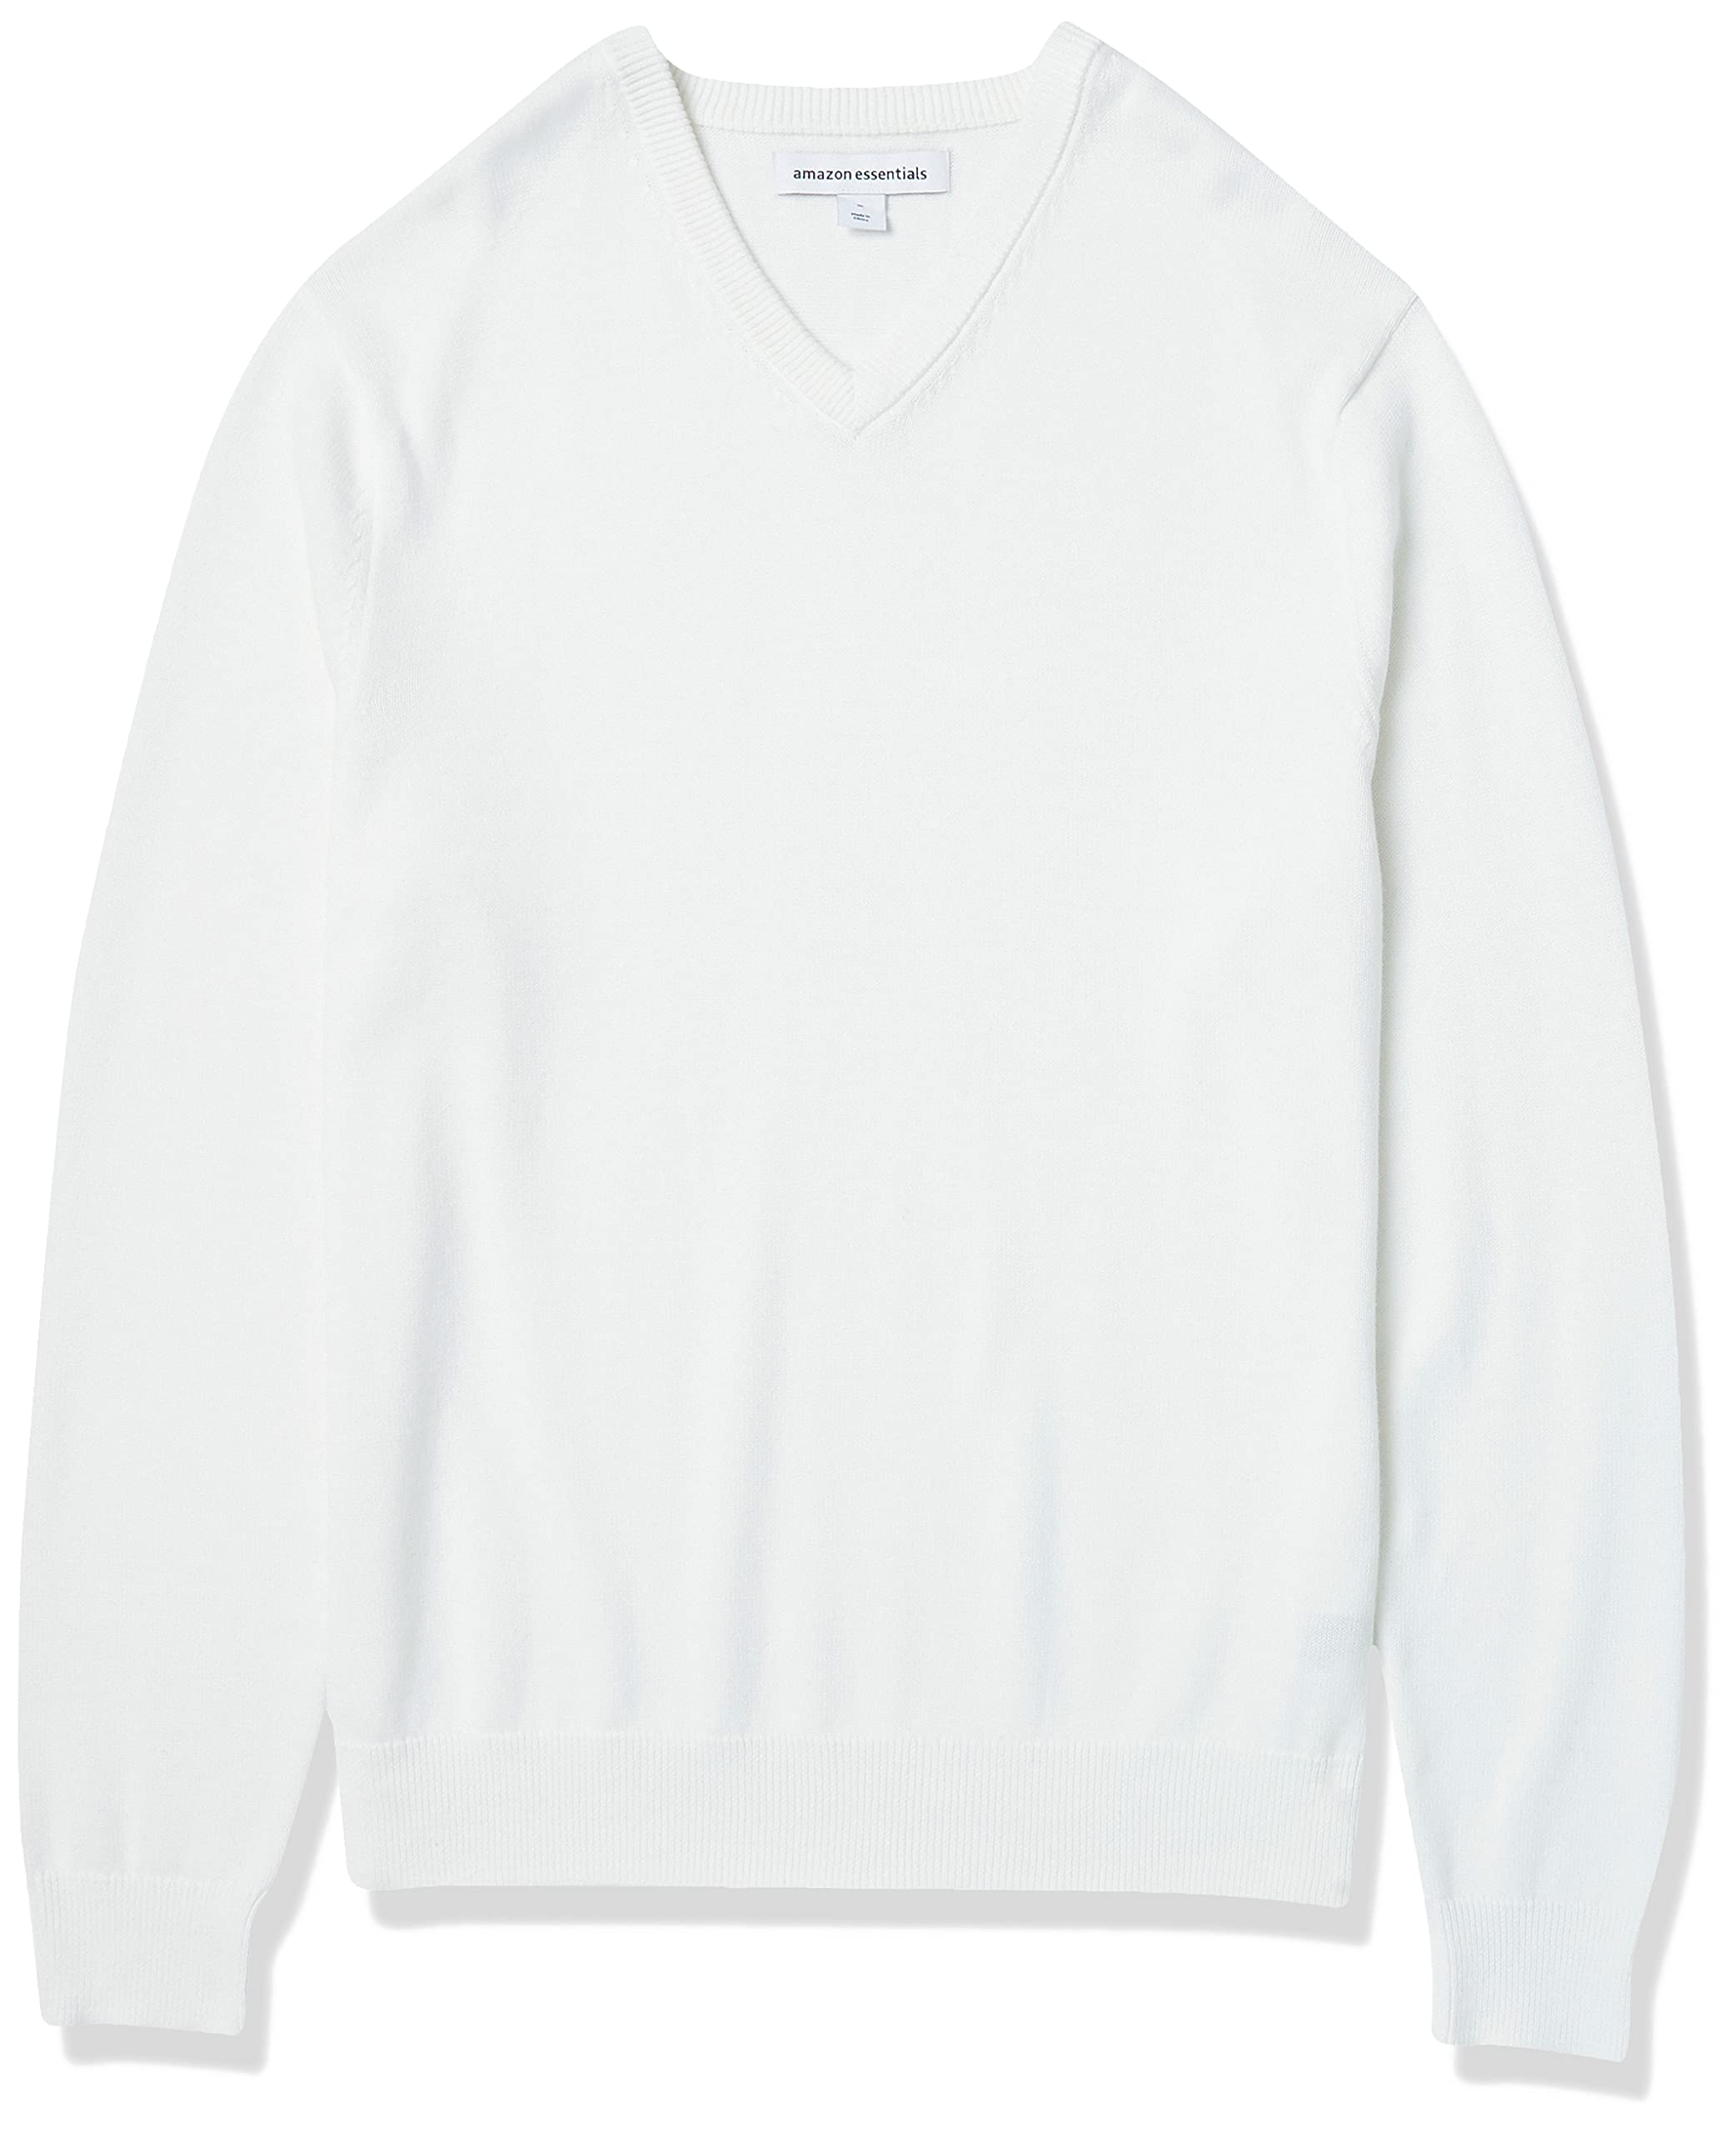 Amazon Essentials Men's V-Neck Sweater (Available in Plus Size)